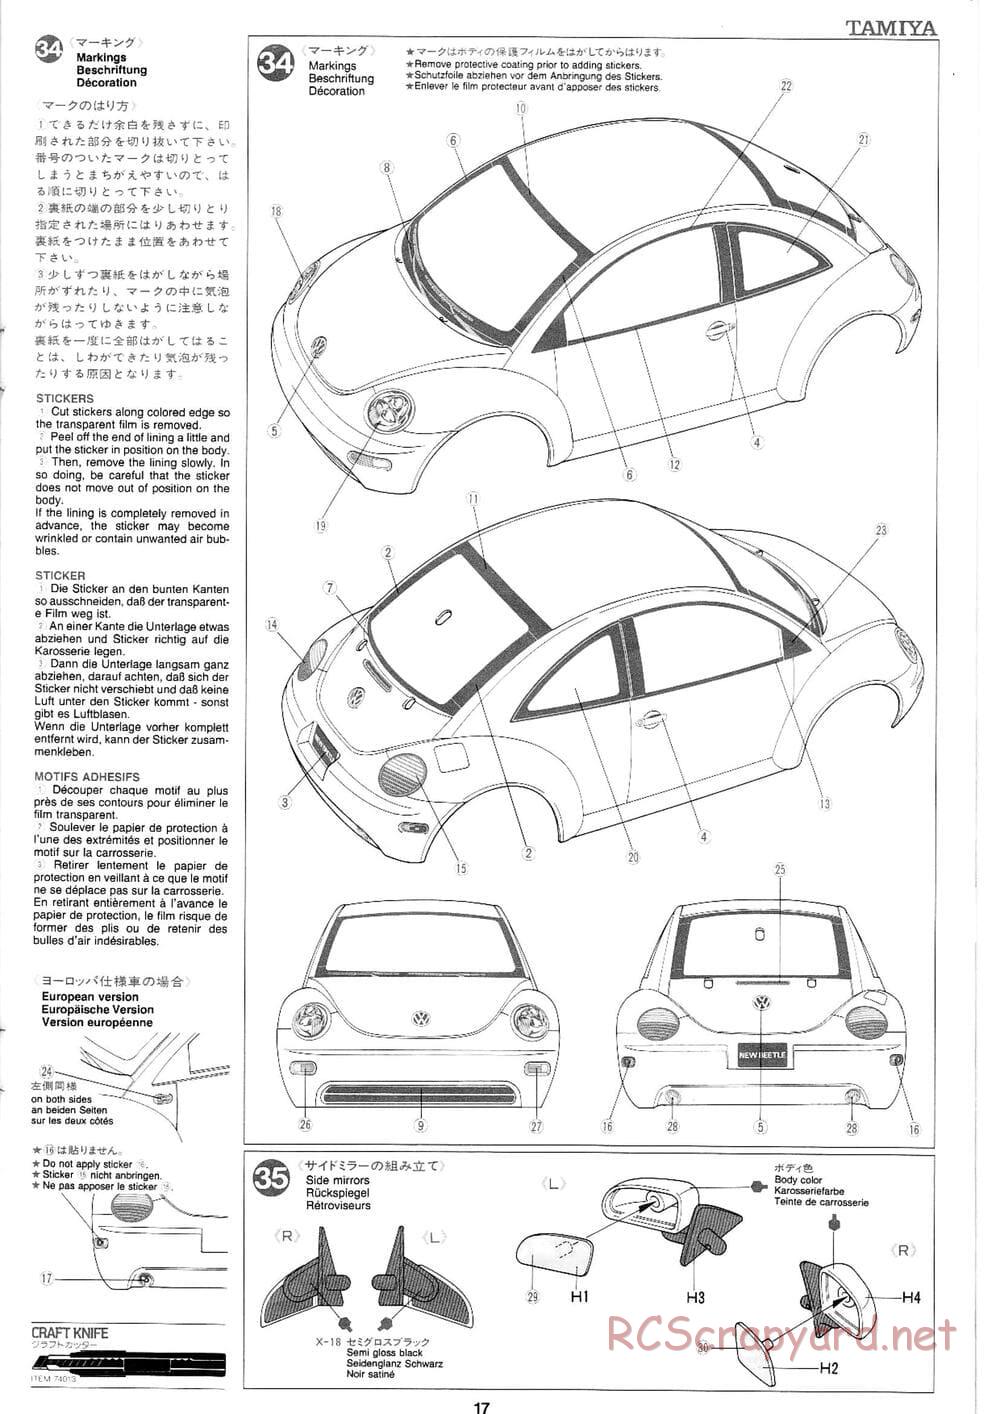 Tamiya - Volkswagen New Beetle - FF-01 Chassis - Manual - Page 15